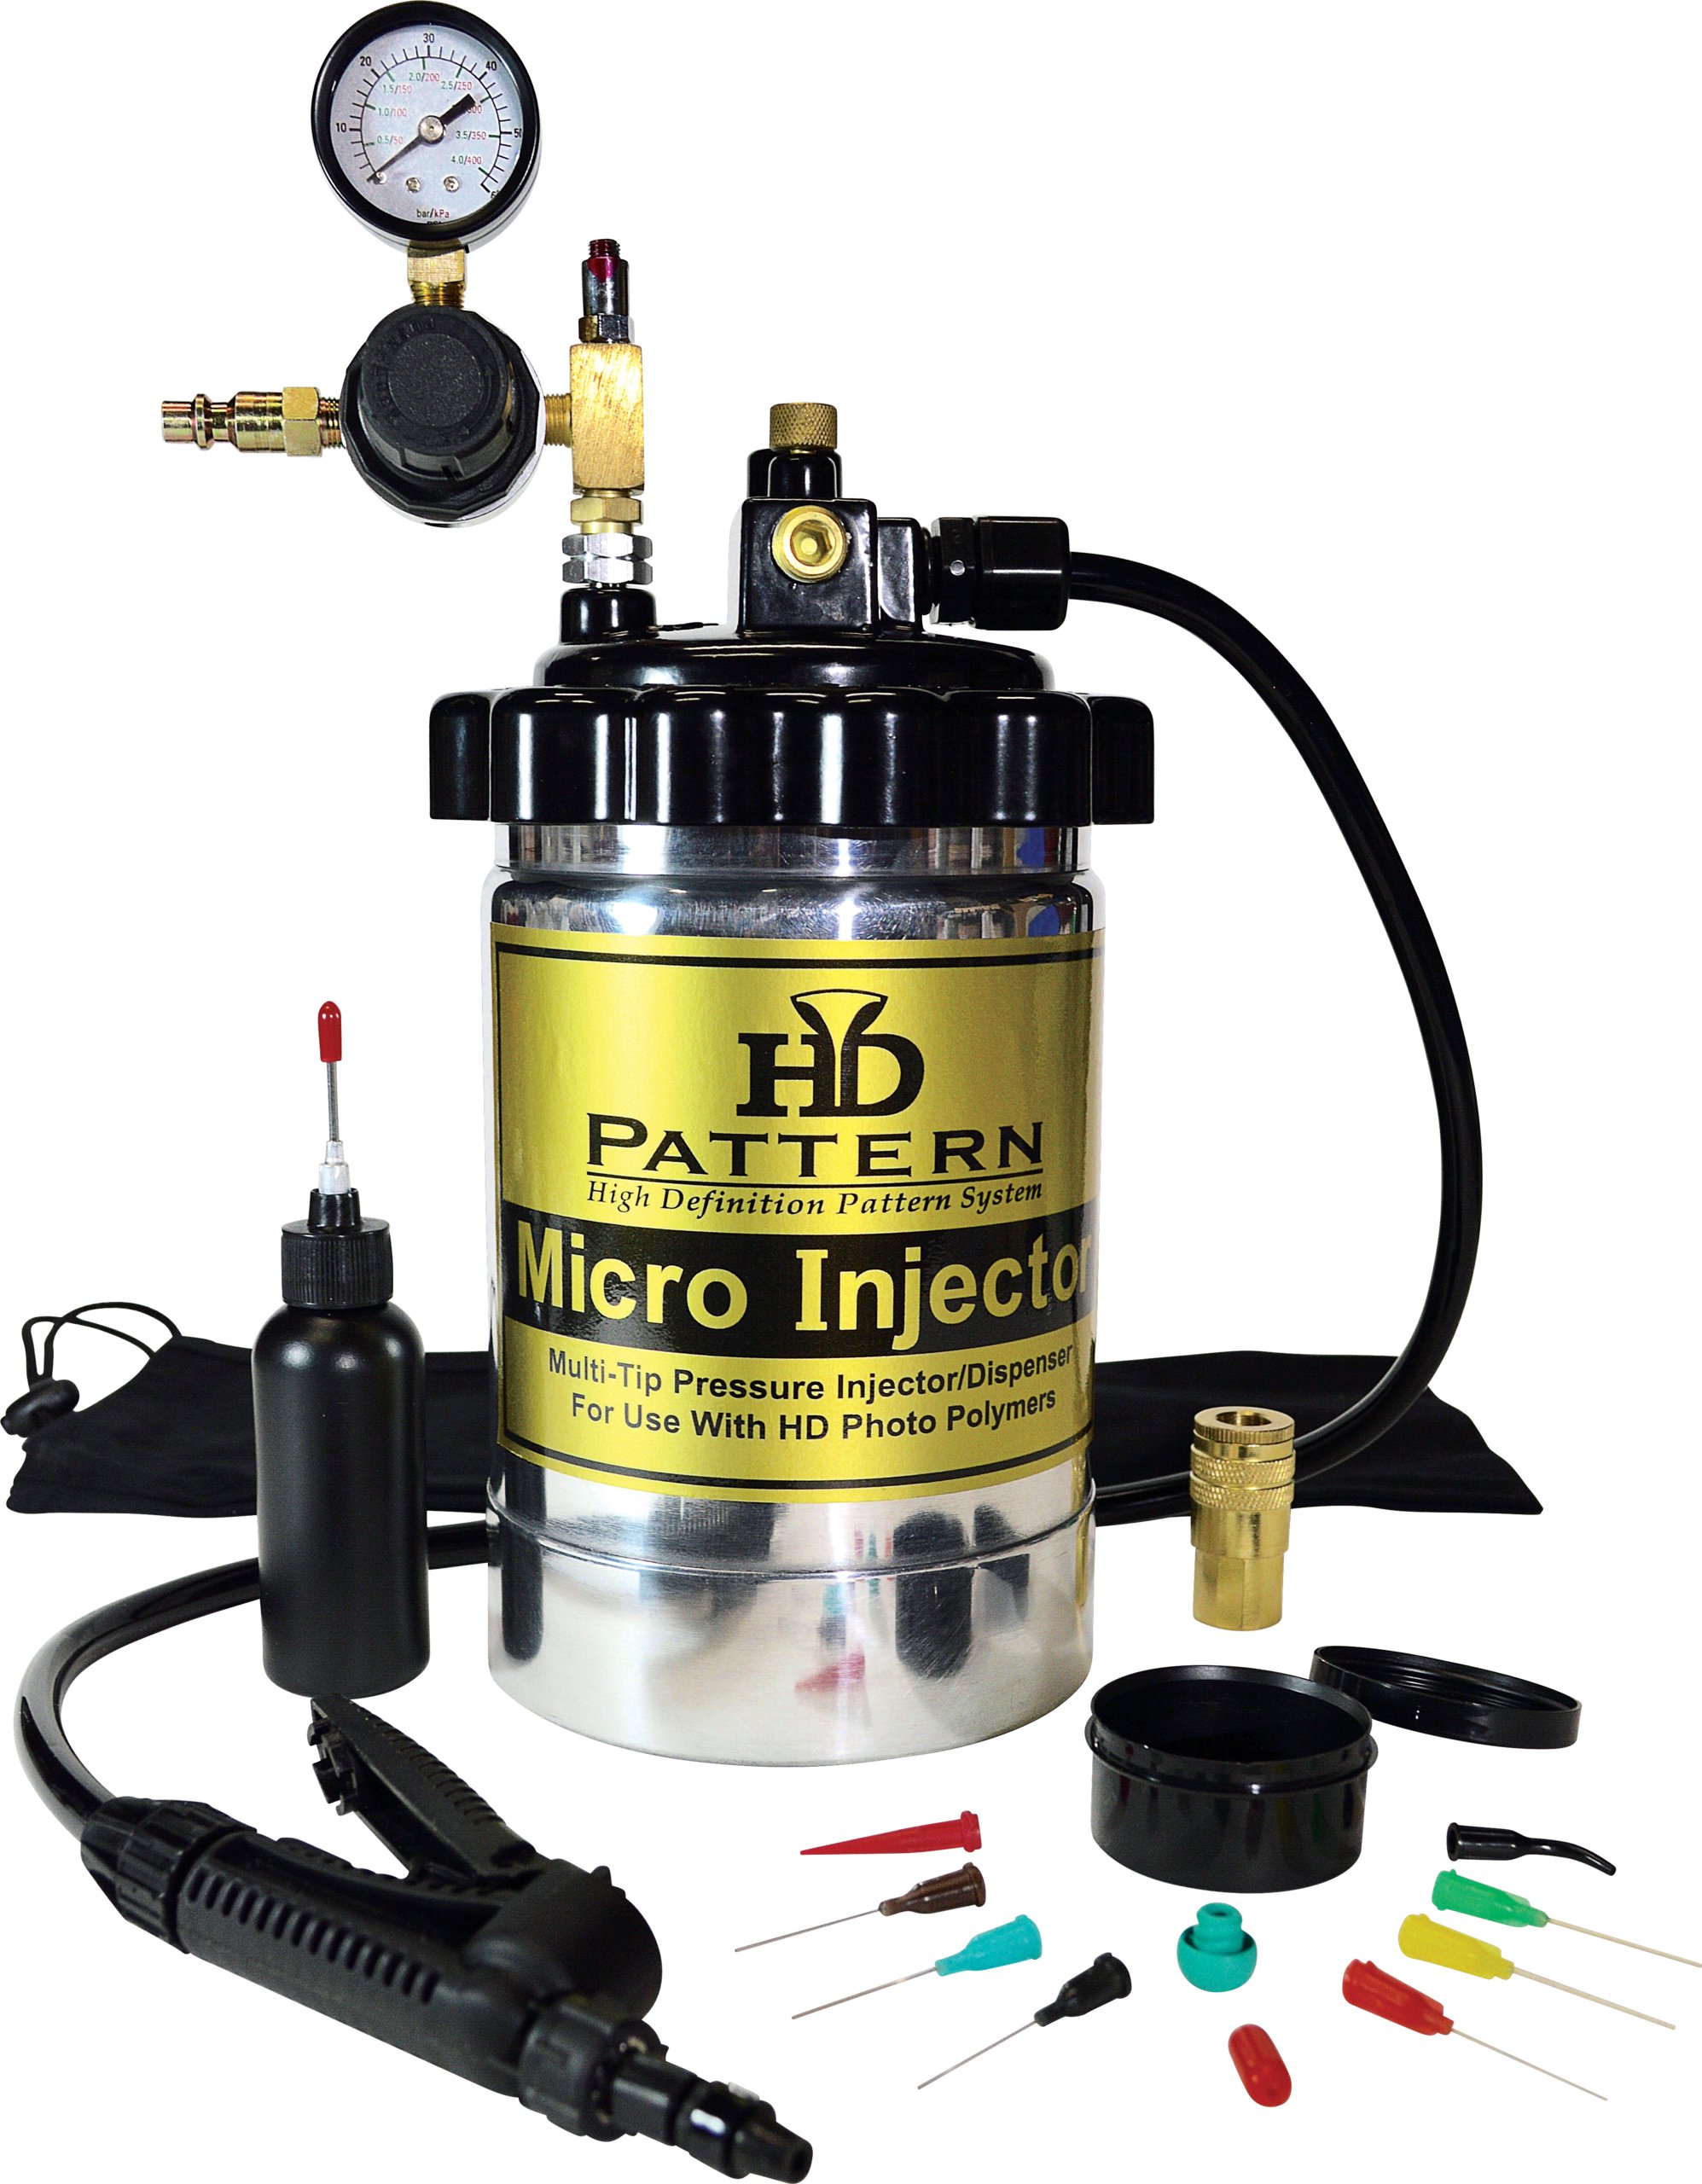 HD Pattern Micro Injector System